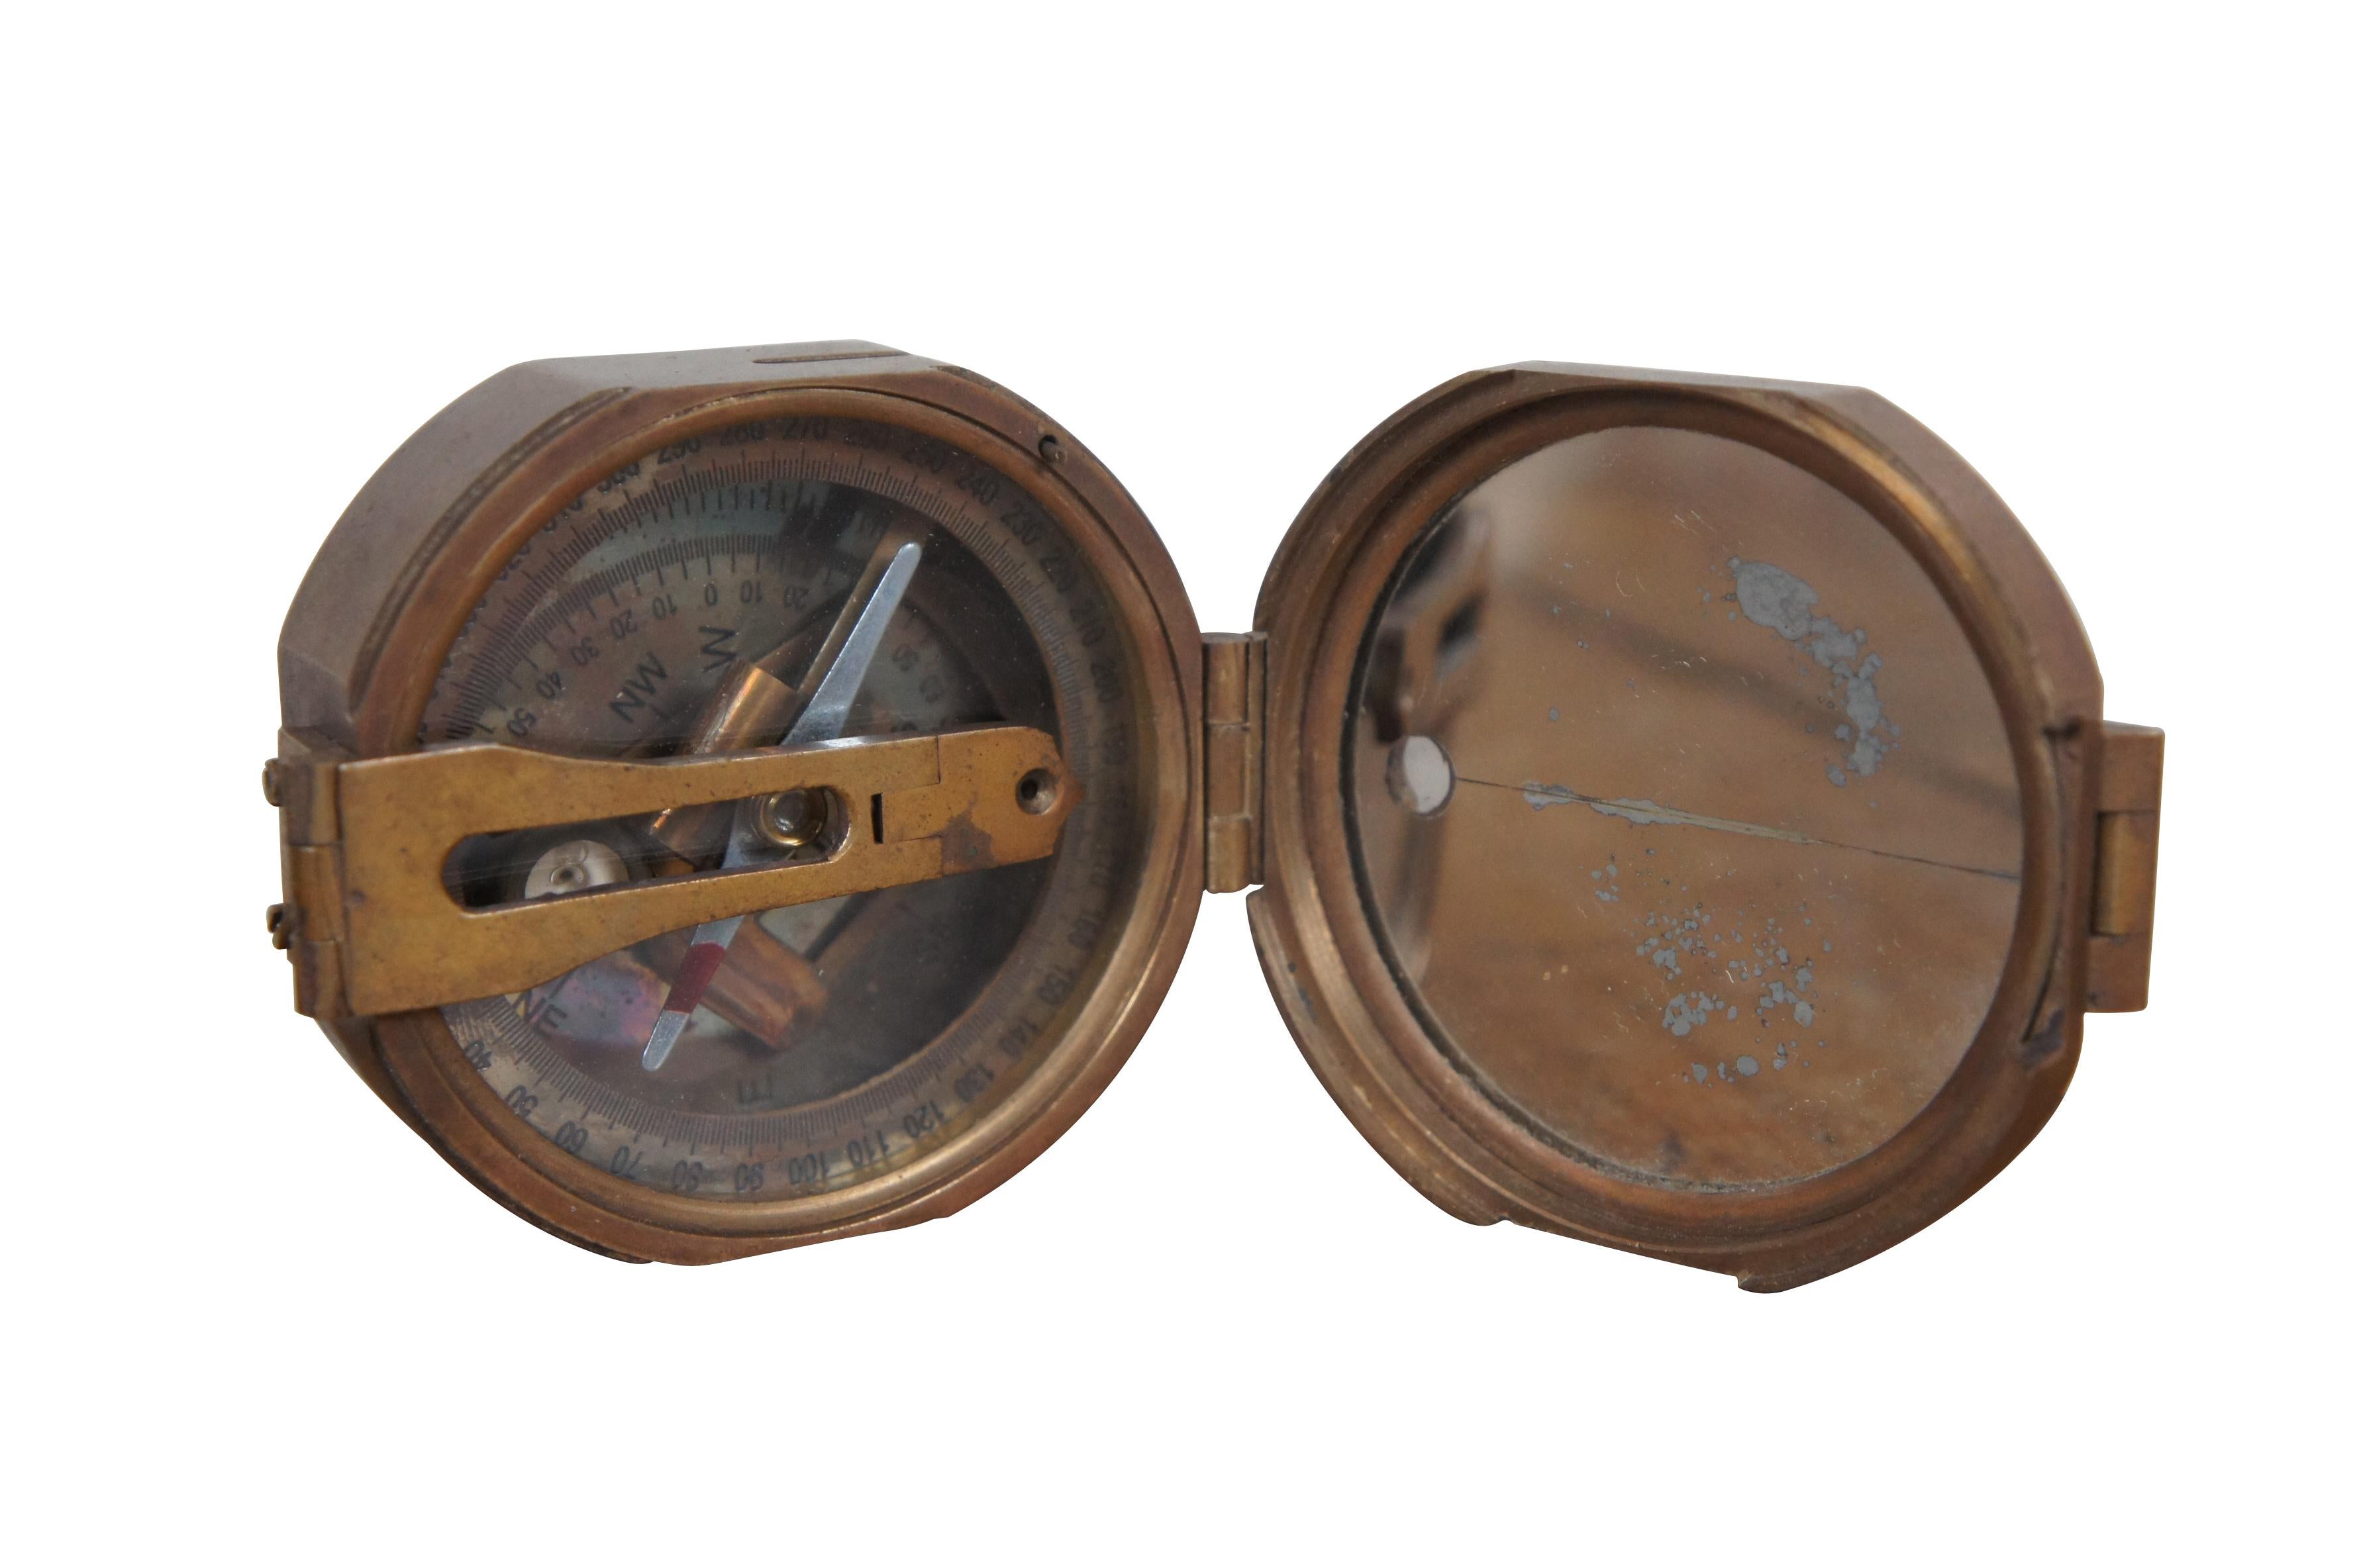 Vintage Stanley London brass Brunton style navigational compass. Natural Sine chart on lid. Mirrored interior of lid with folding sight. Etched brass face with circular and tube bubble levels.

